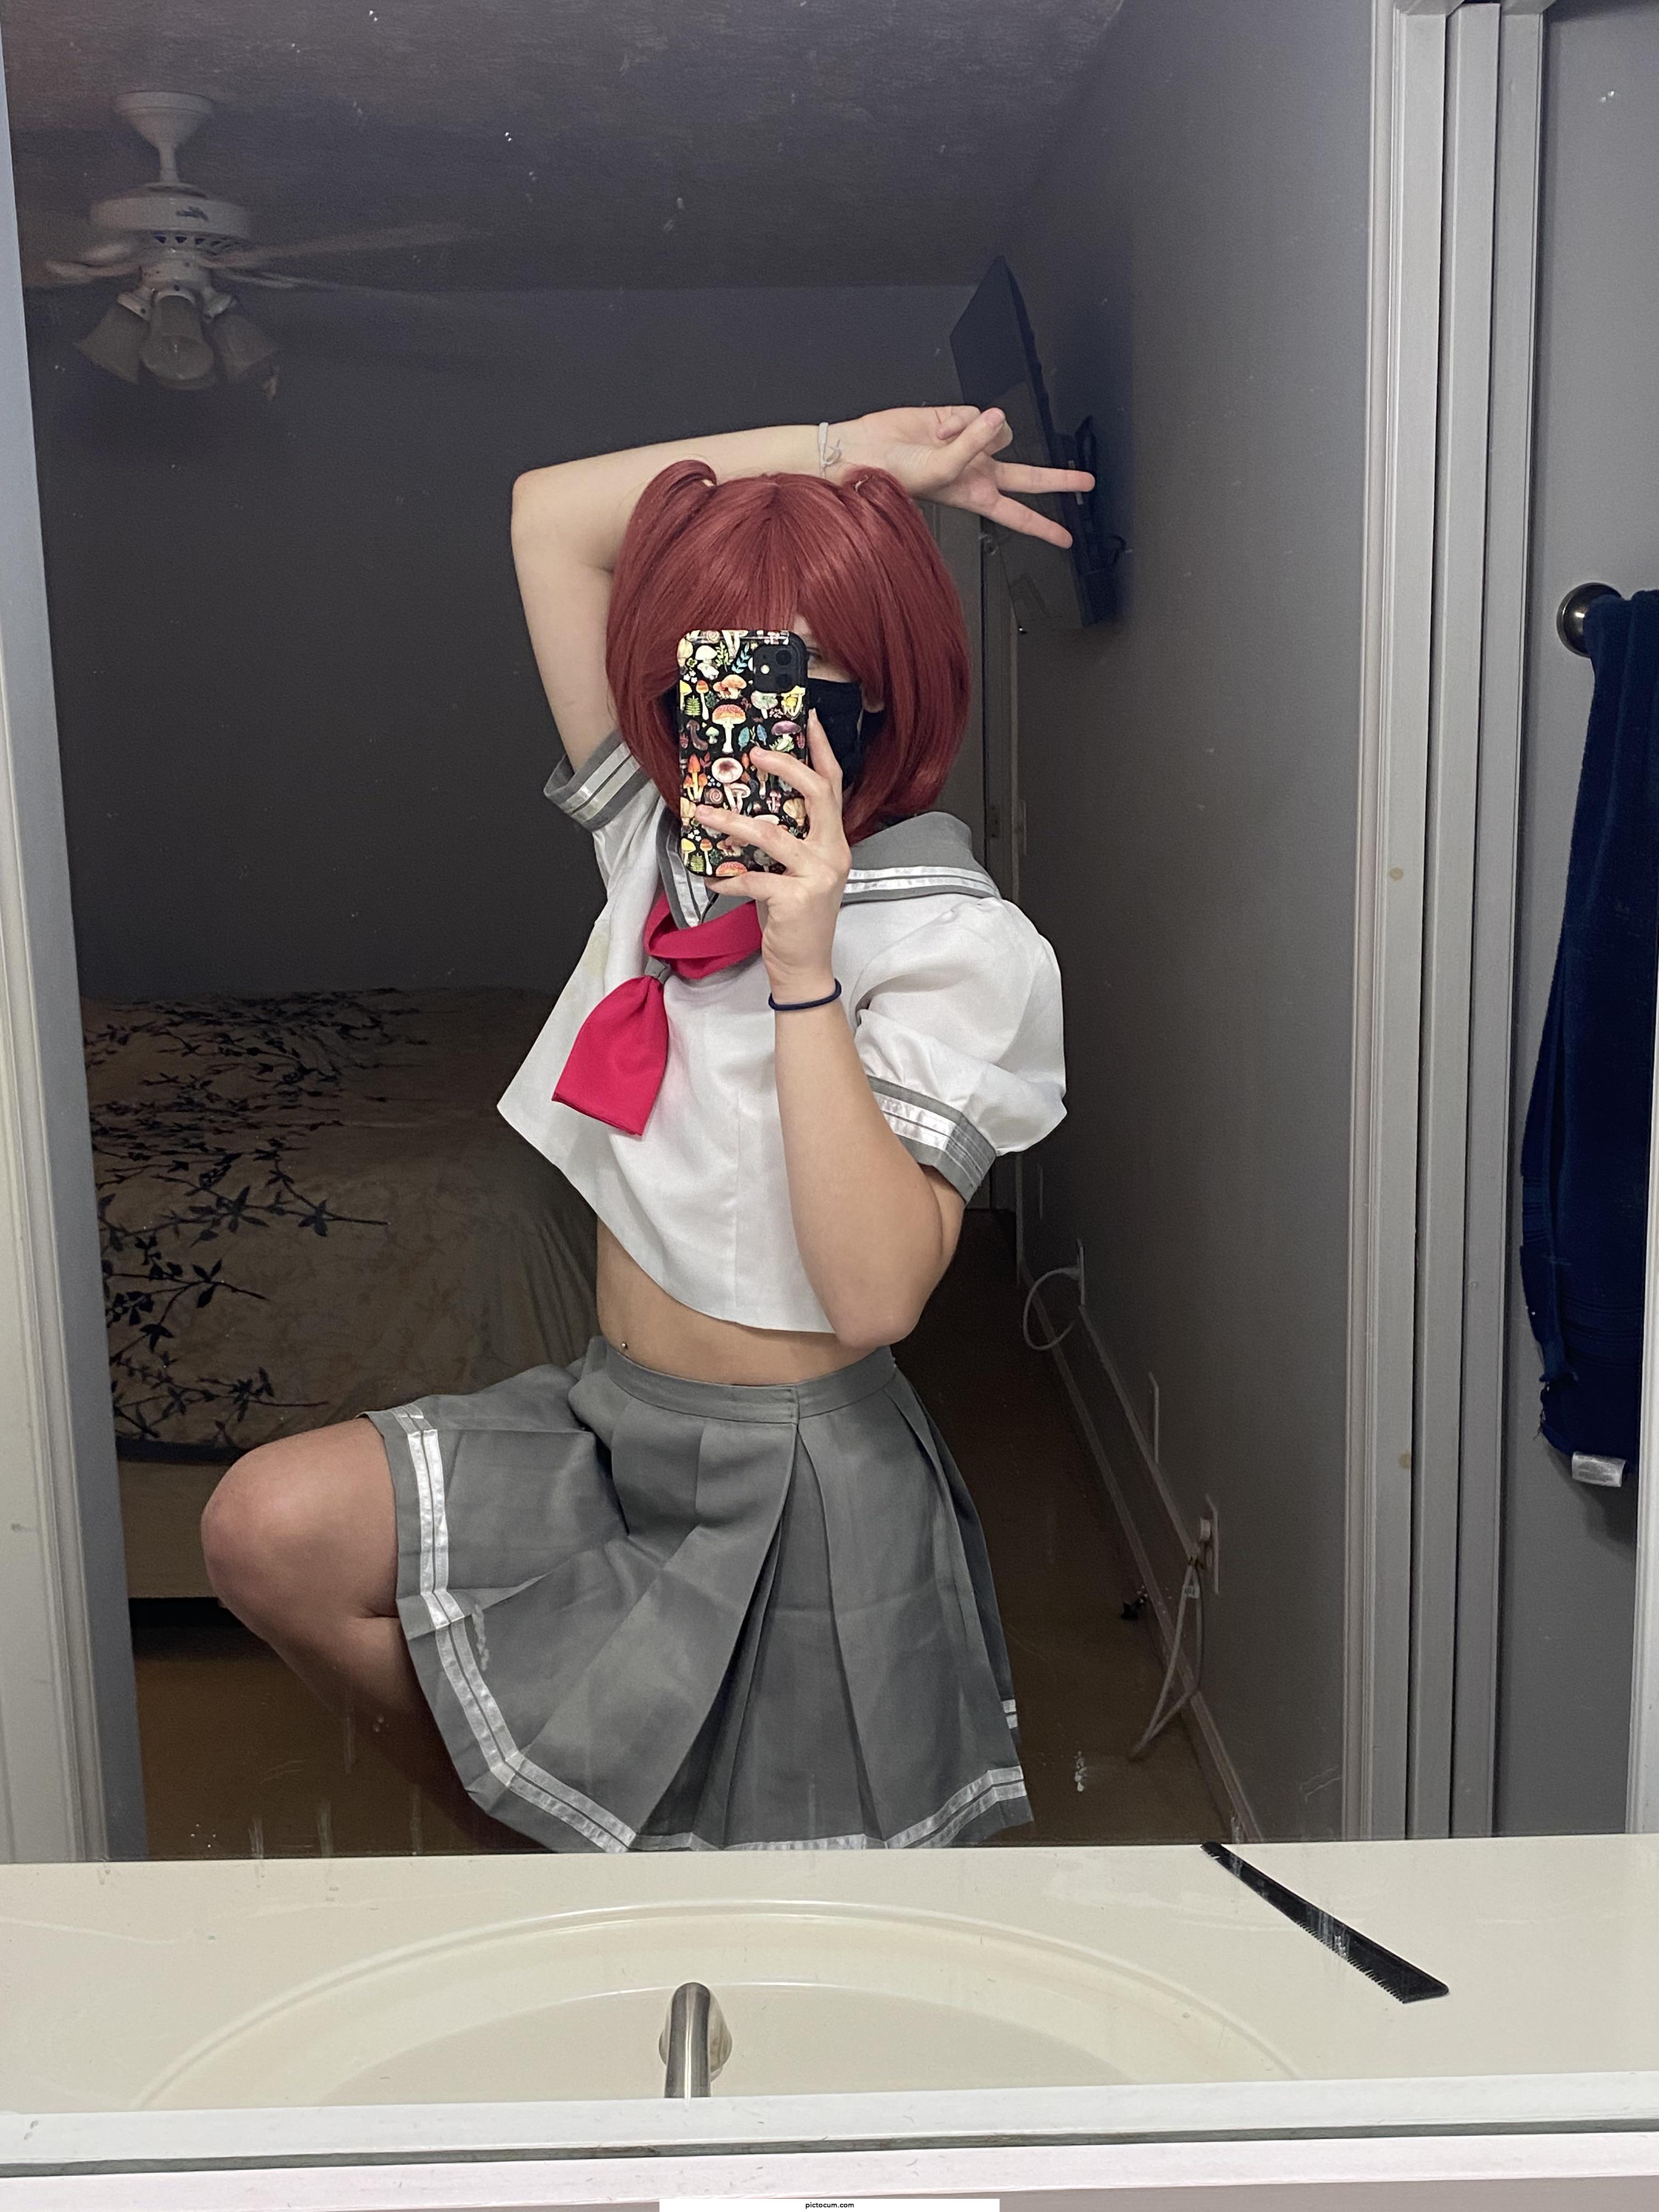 More lewd Ruby cosplays on the way! 🍆❤️🍒 Who’s your best girl atm? Mines Nozo and ruby&lt;3